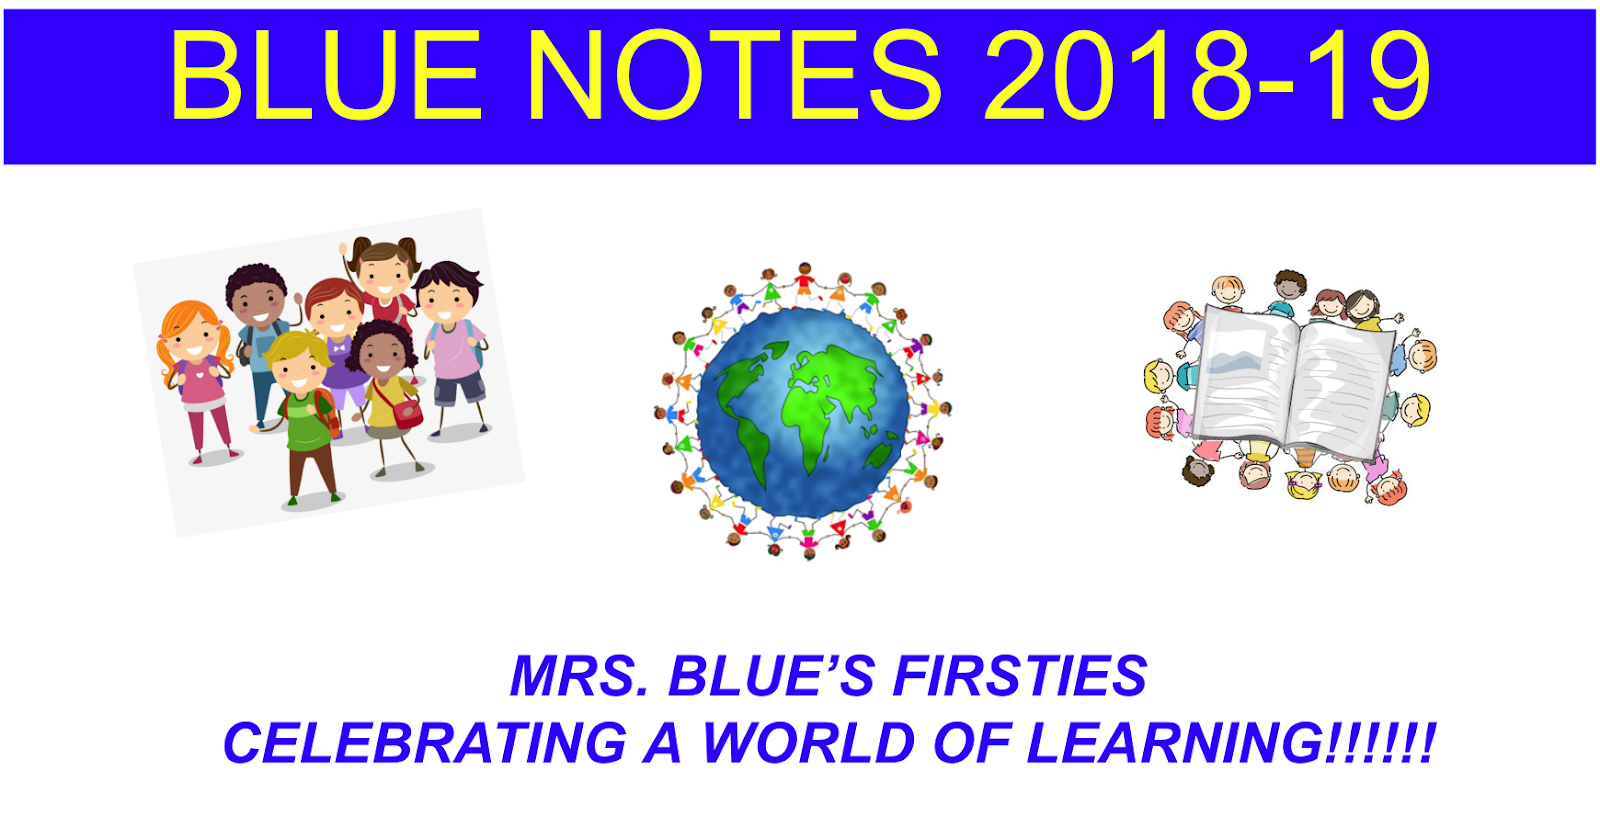 Blue Notes 2018-19